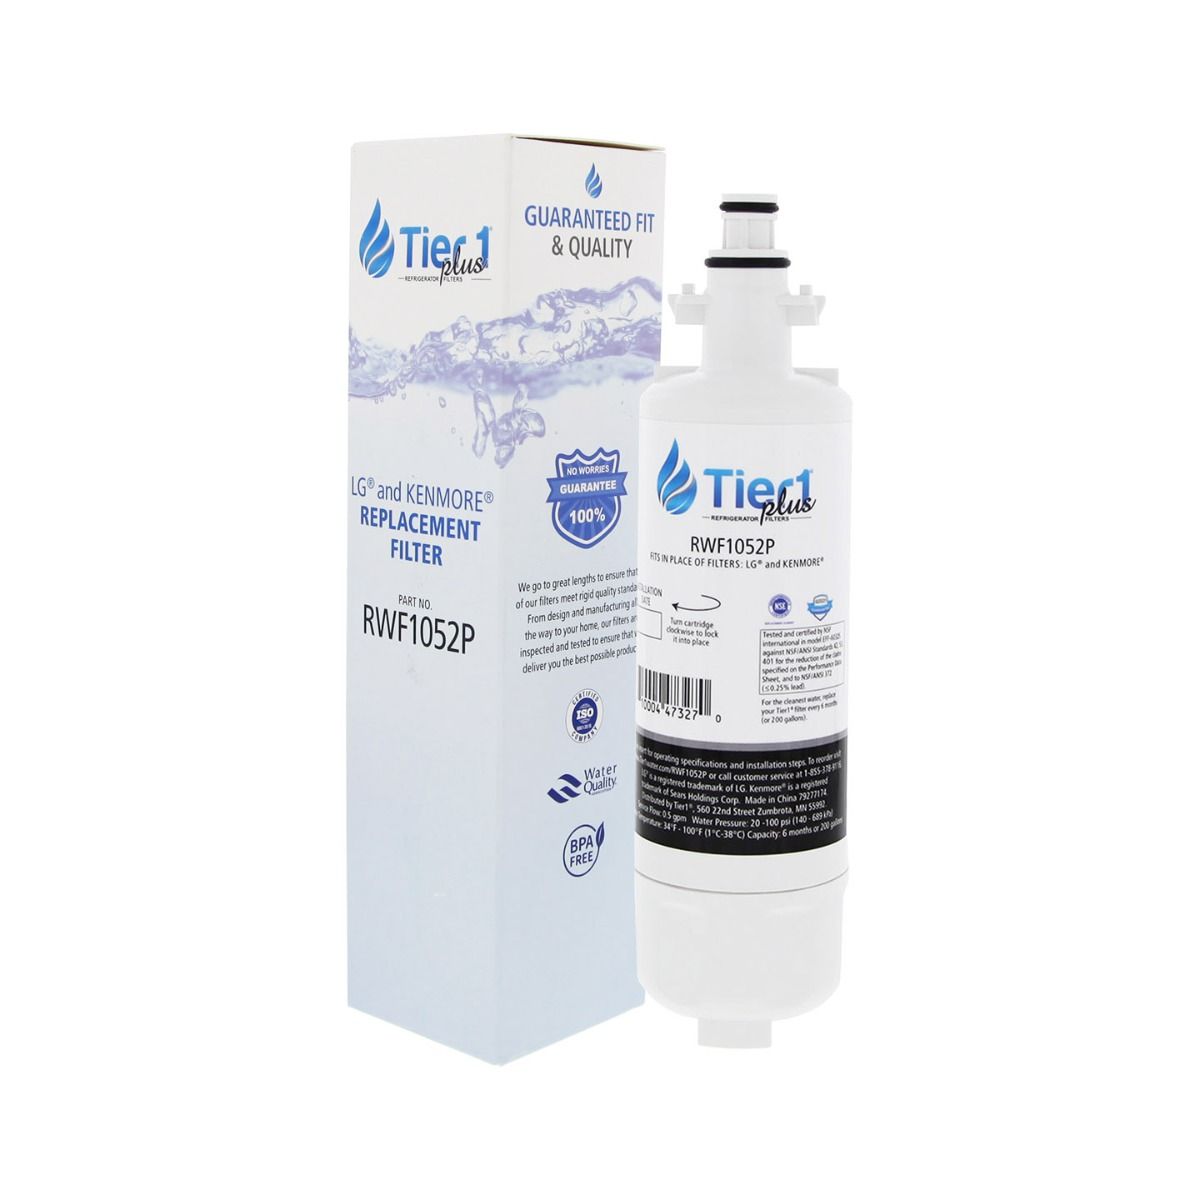 Tier1 Plus LG LT700P Comparable Refrigerator Water Filter Replacement (filter)